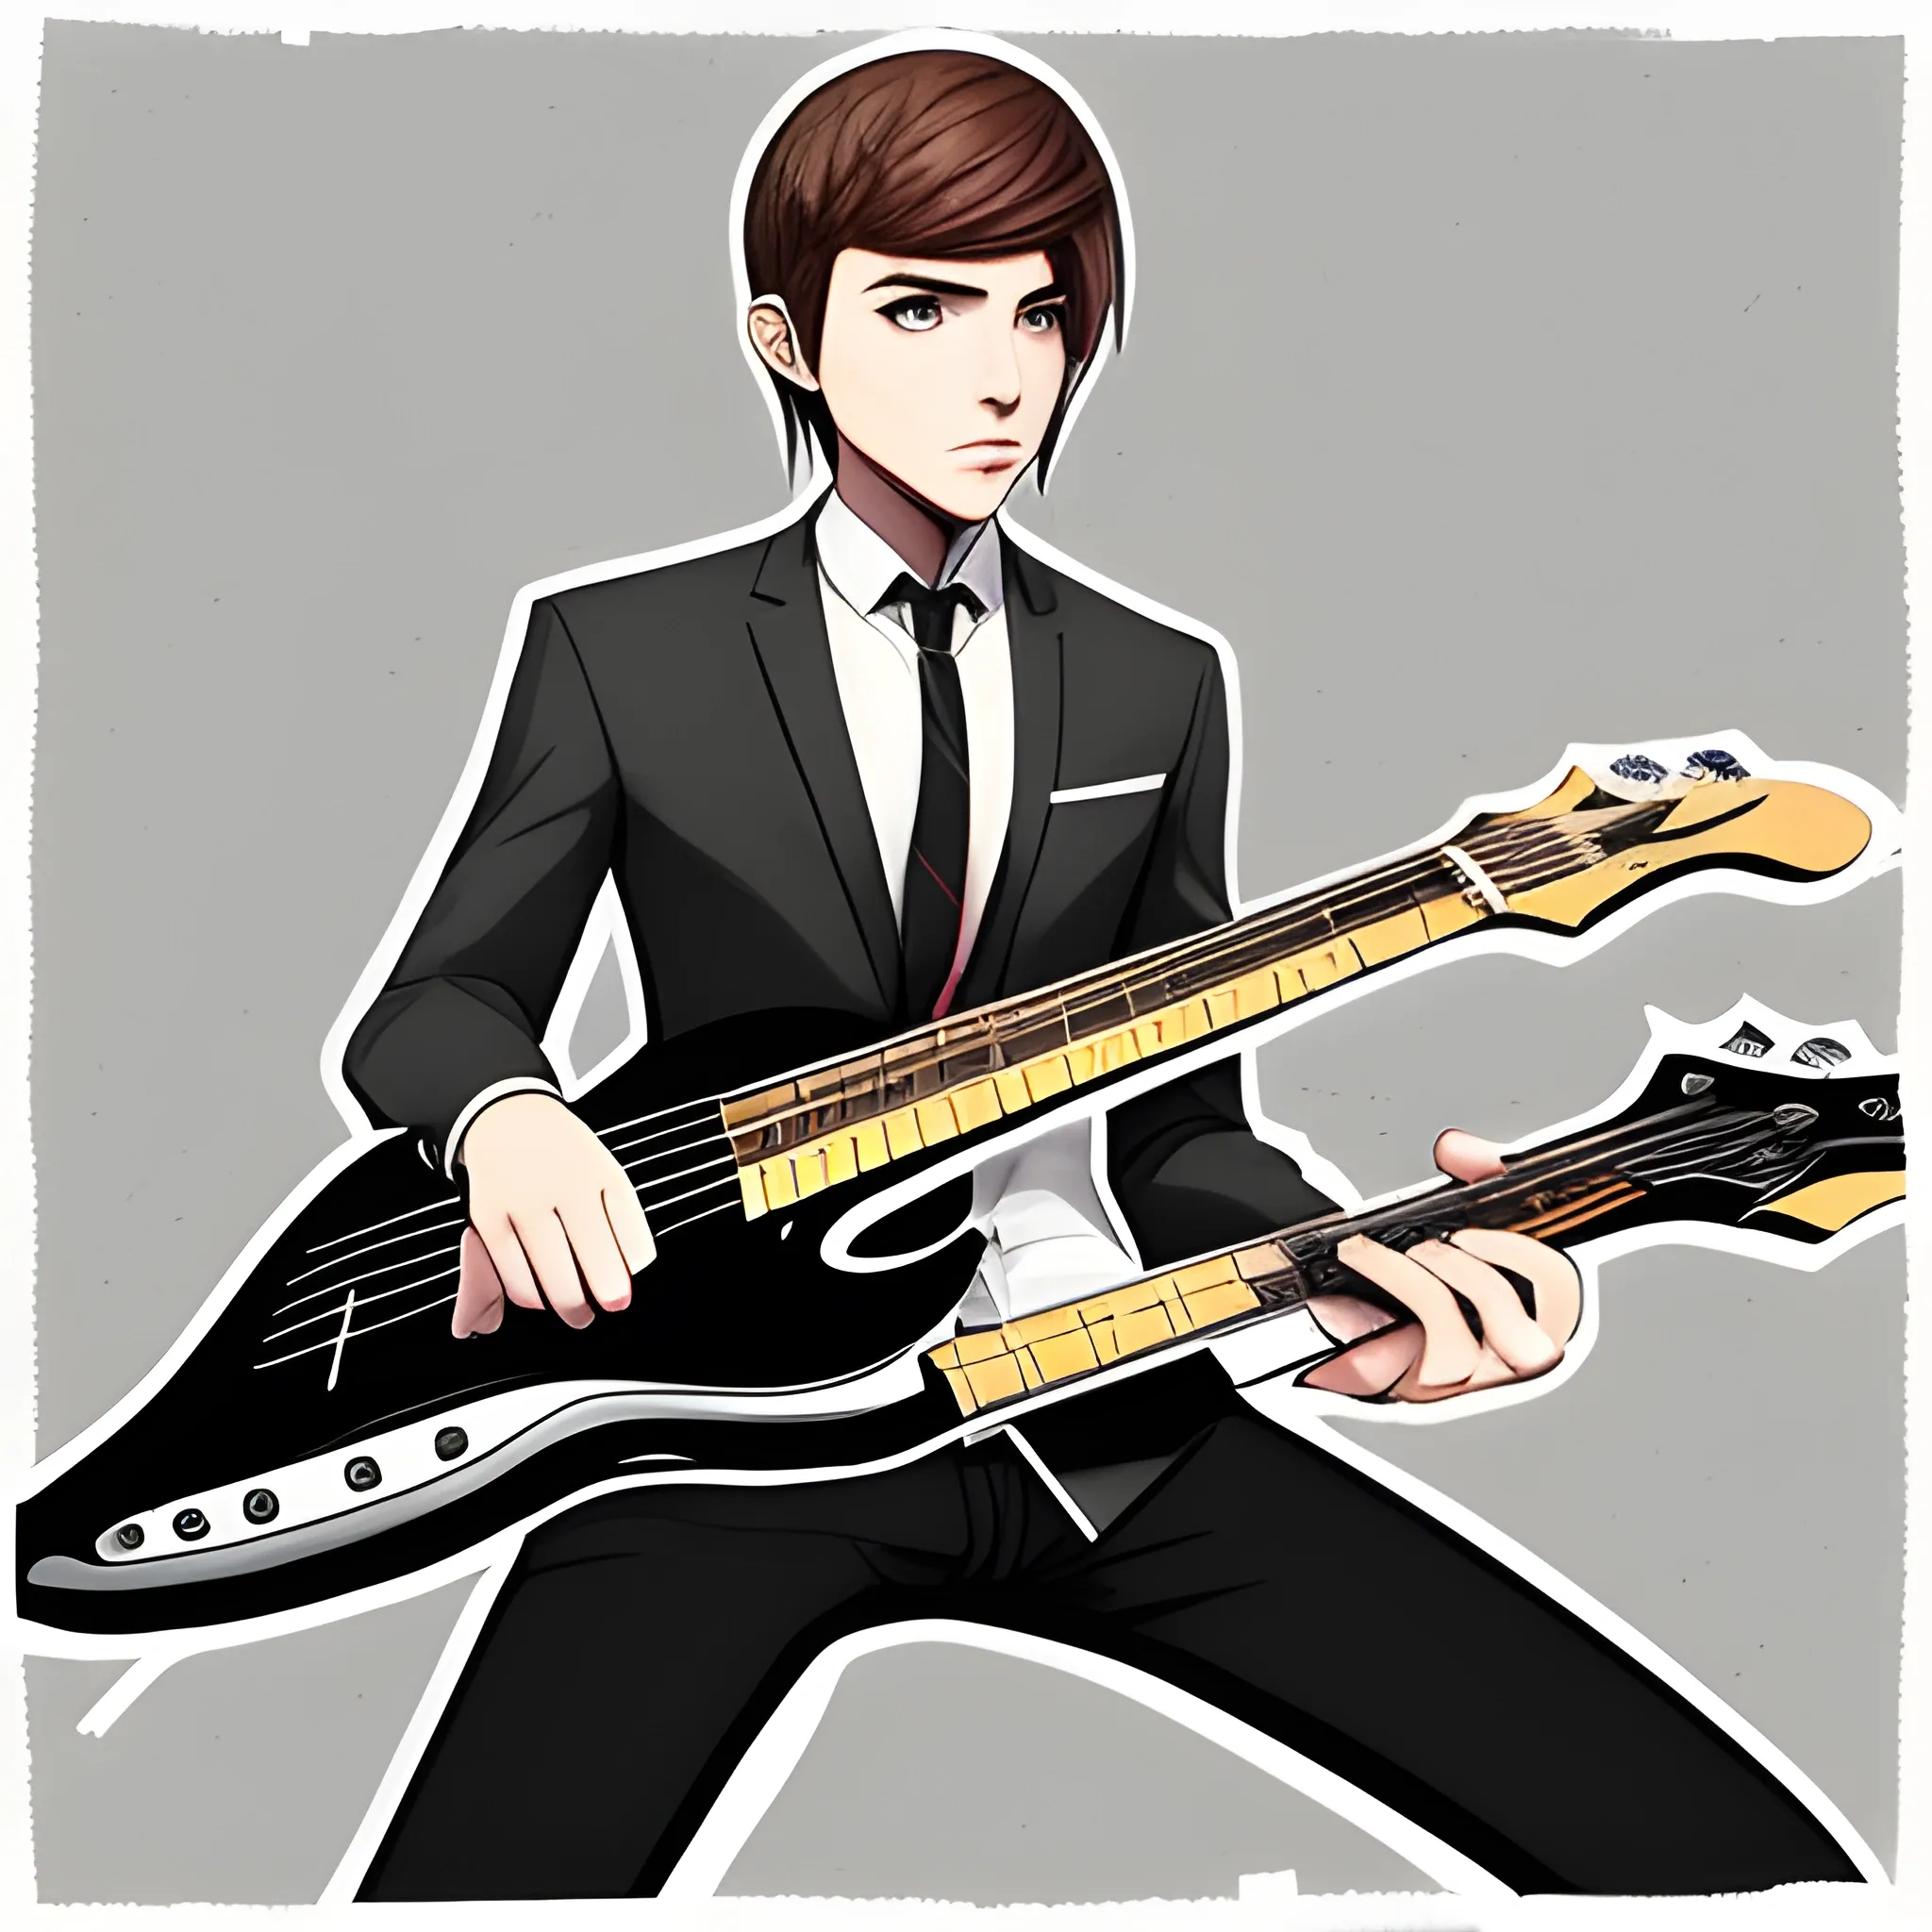 A guy with a bass guitar in a black skinny tie. A picture in the style of the game Life is strange, Anime, Cartoon